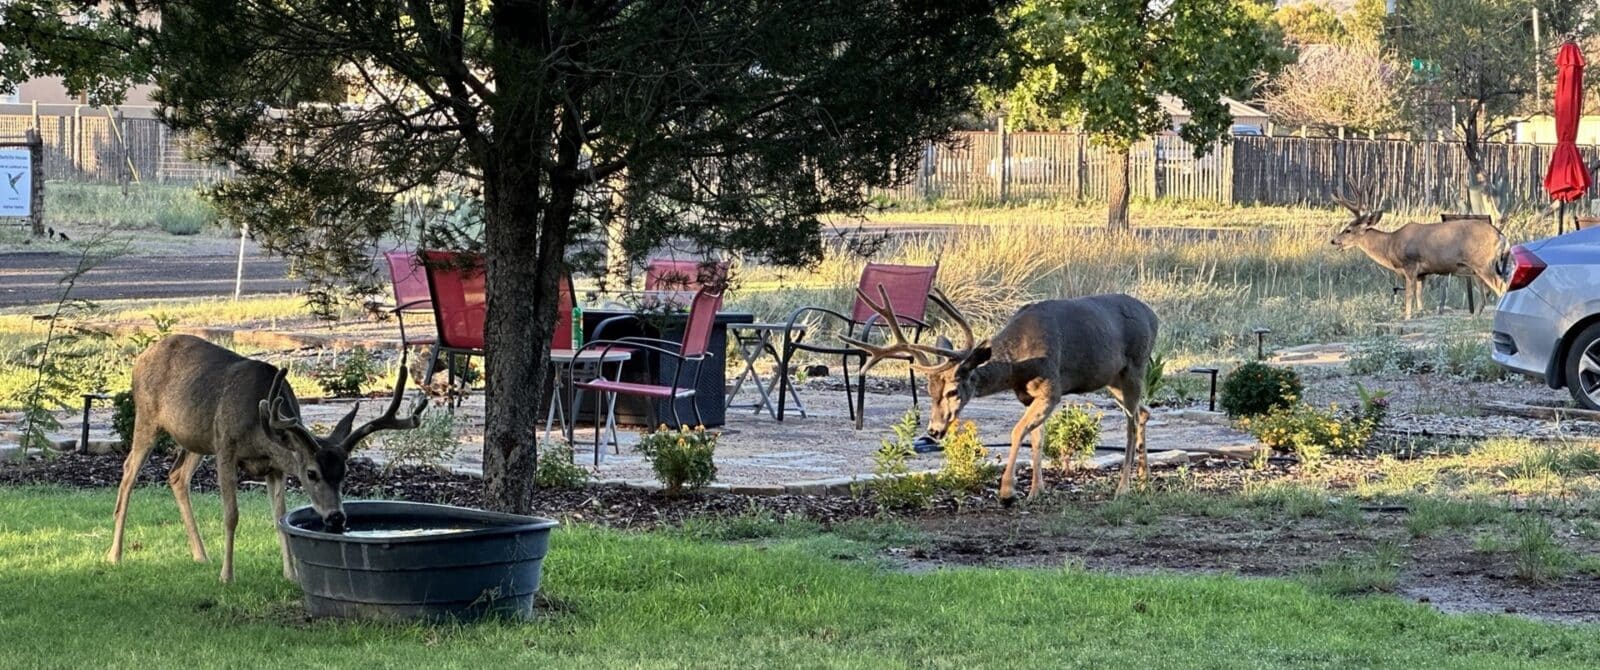 3 mule deer, one drinking from a water trough and 2 eating the plants around a fire pit